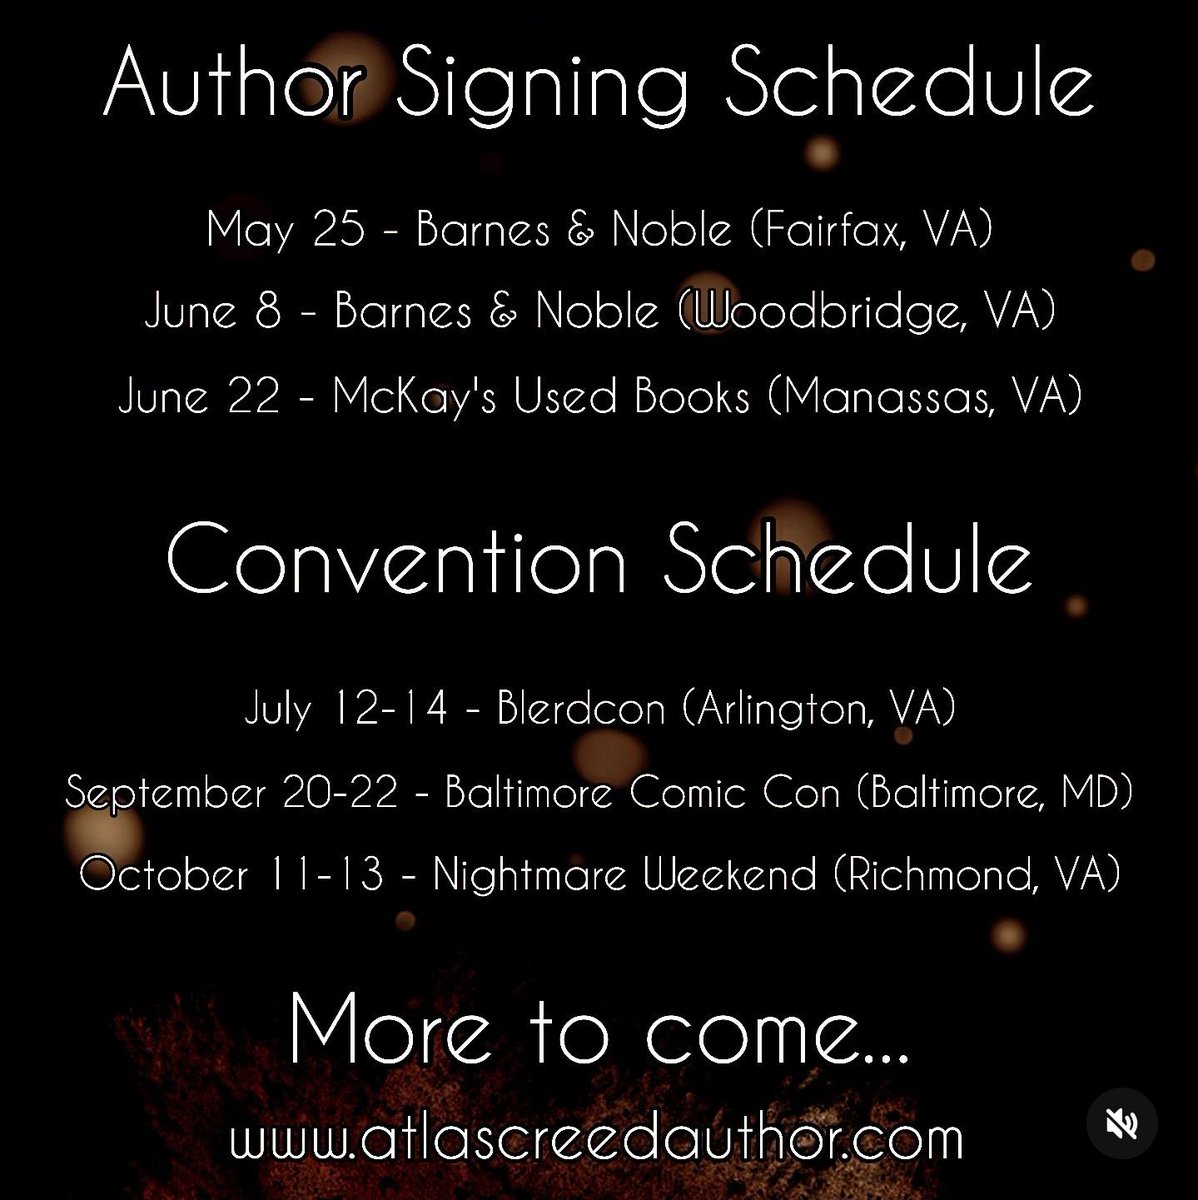 Upcoming events that I will be at!

#authorsigning #writerslift #debutnovel #booktwt